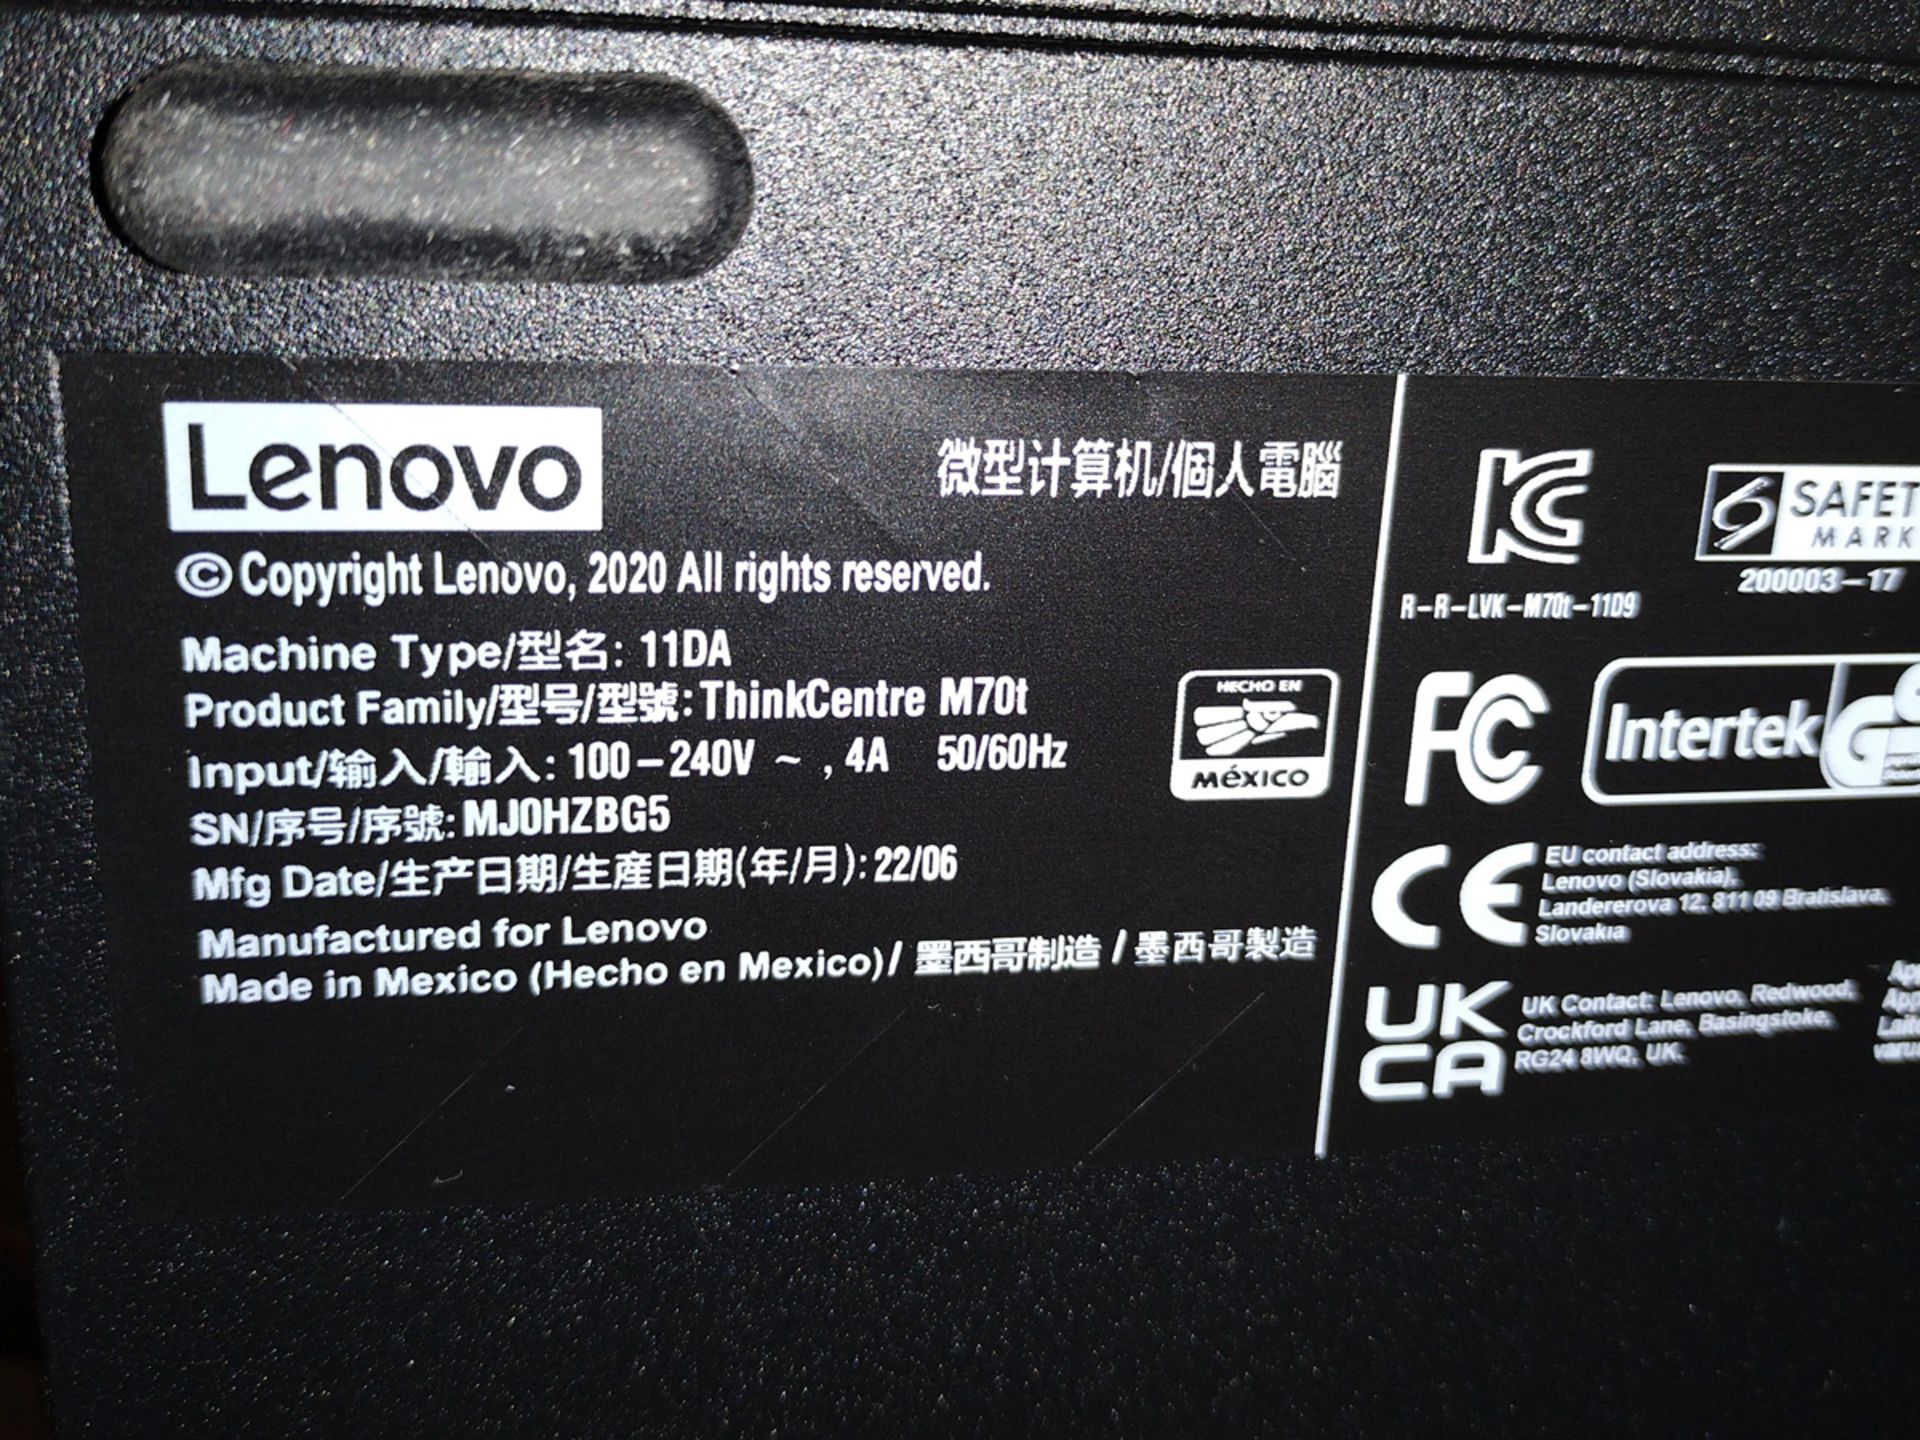 Lenovo M70t ThinkCentre i5 PC w/ Monitor and Keyboard - Image 2 of 2